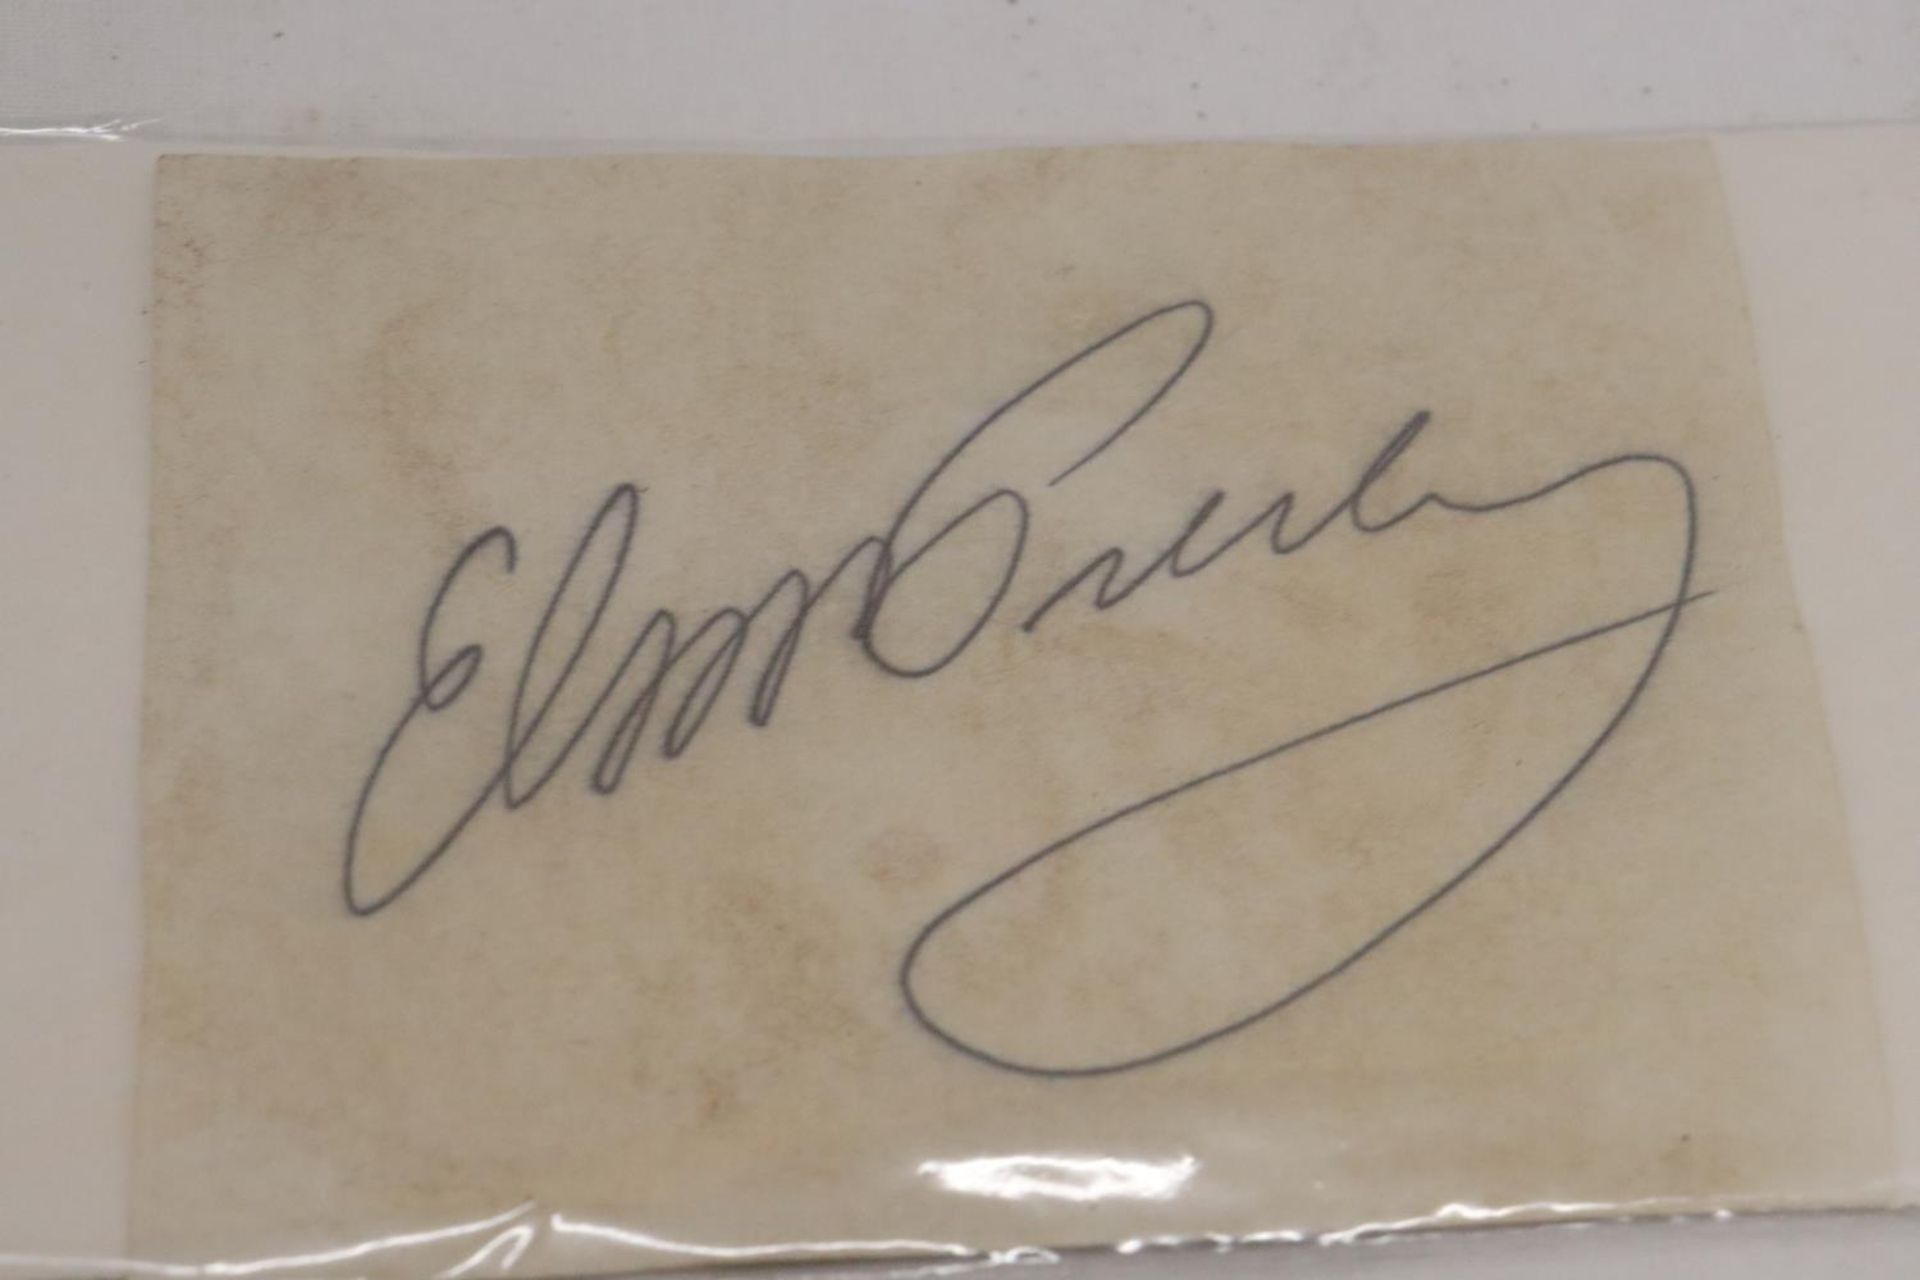 AN ELVIS PRESLEY AUTOGRAPH ON PAPER - Image 2 of 2